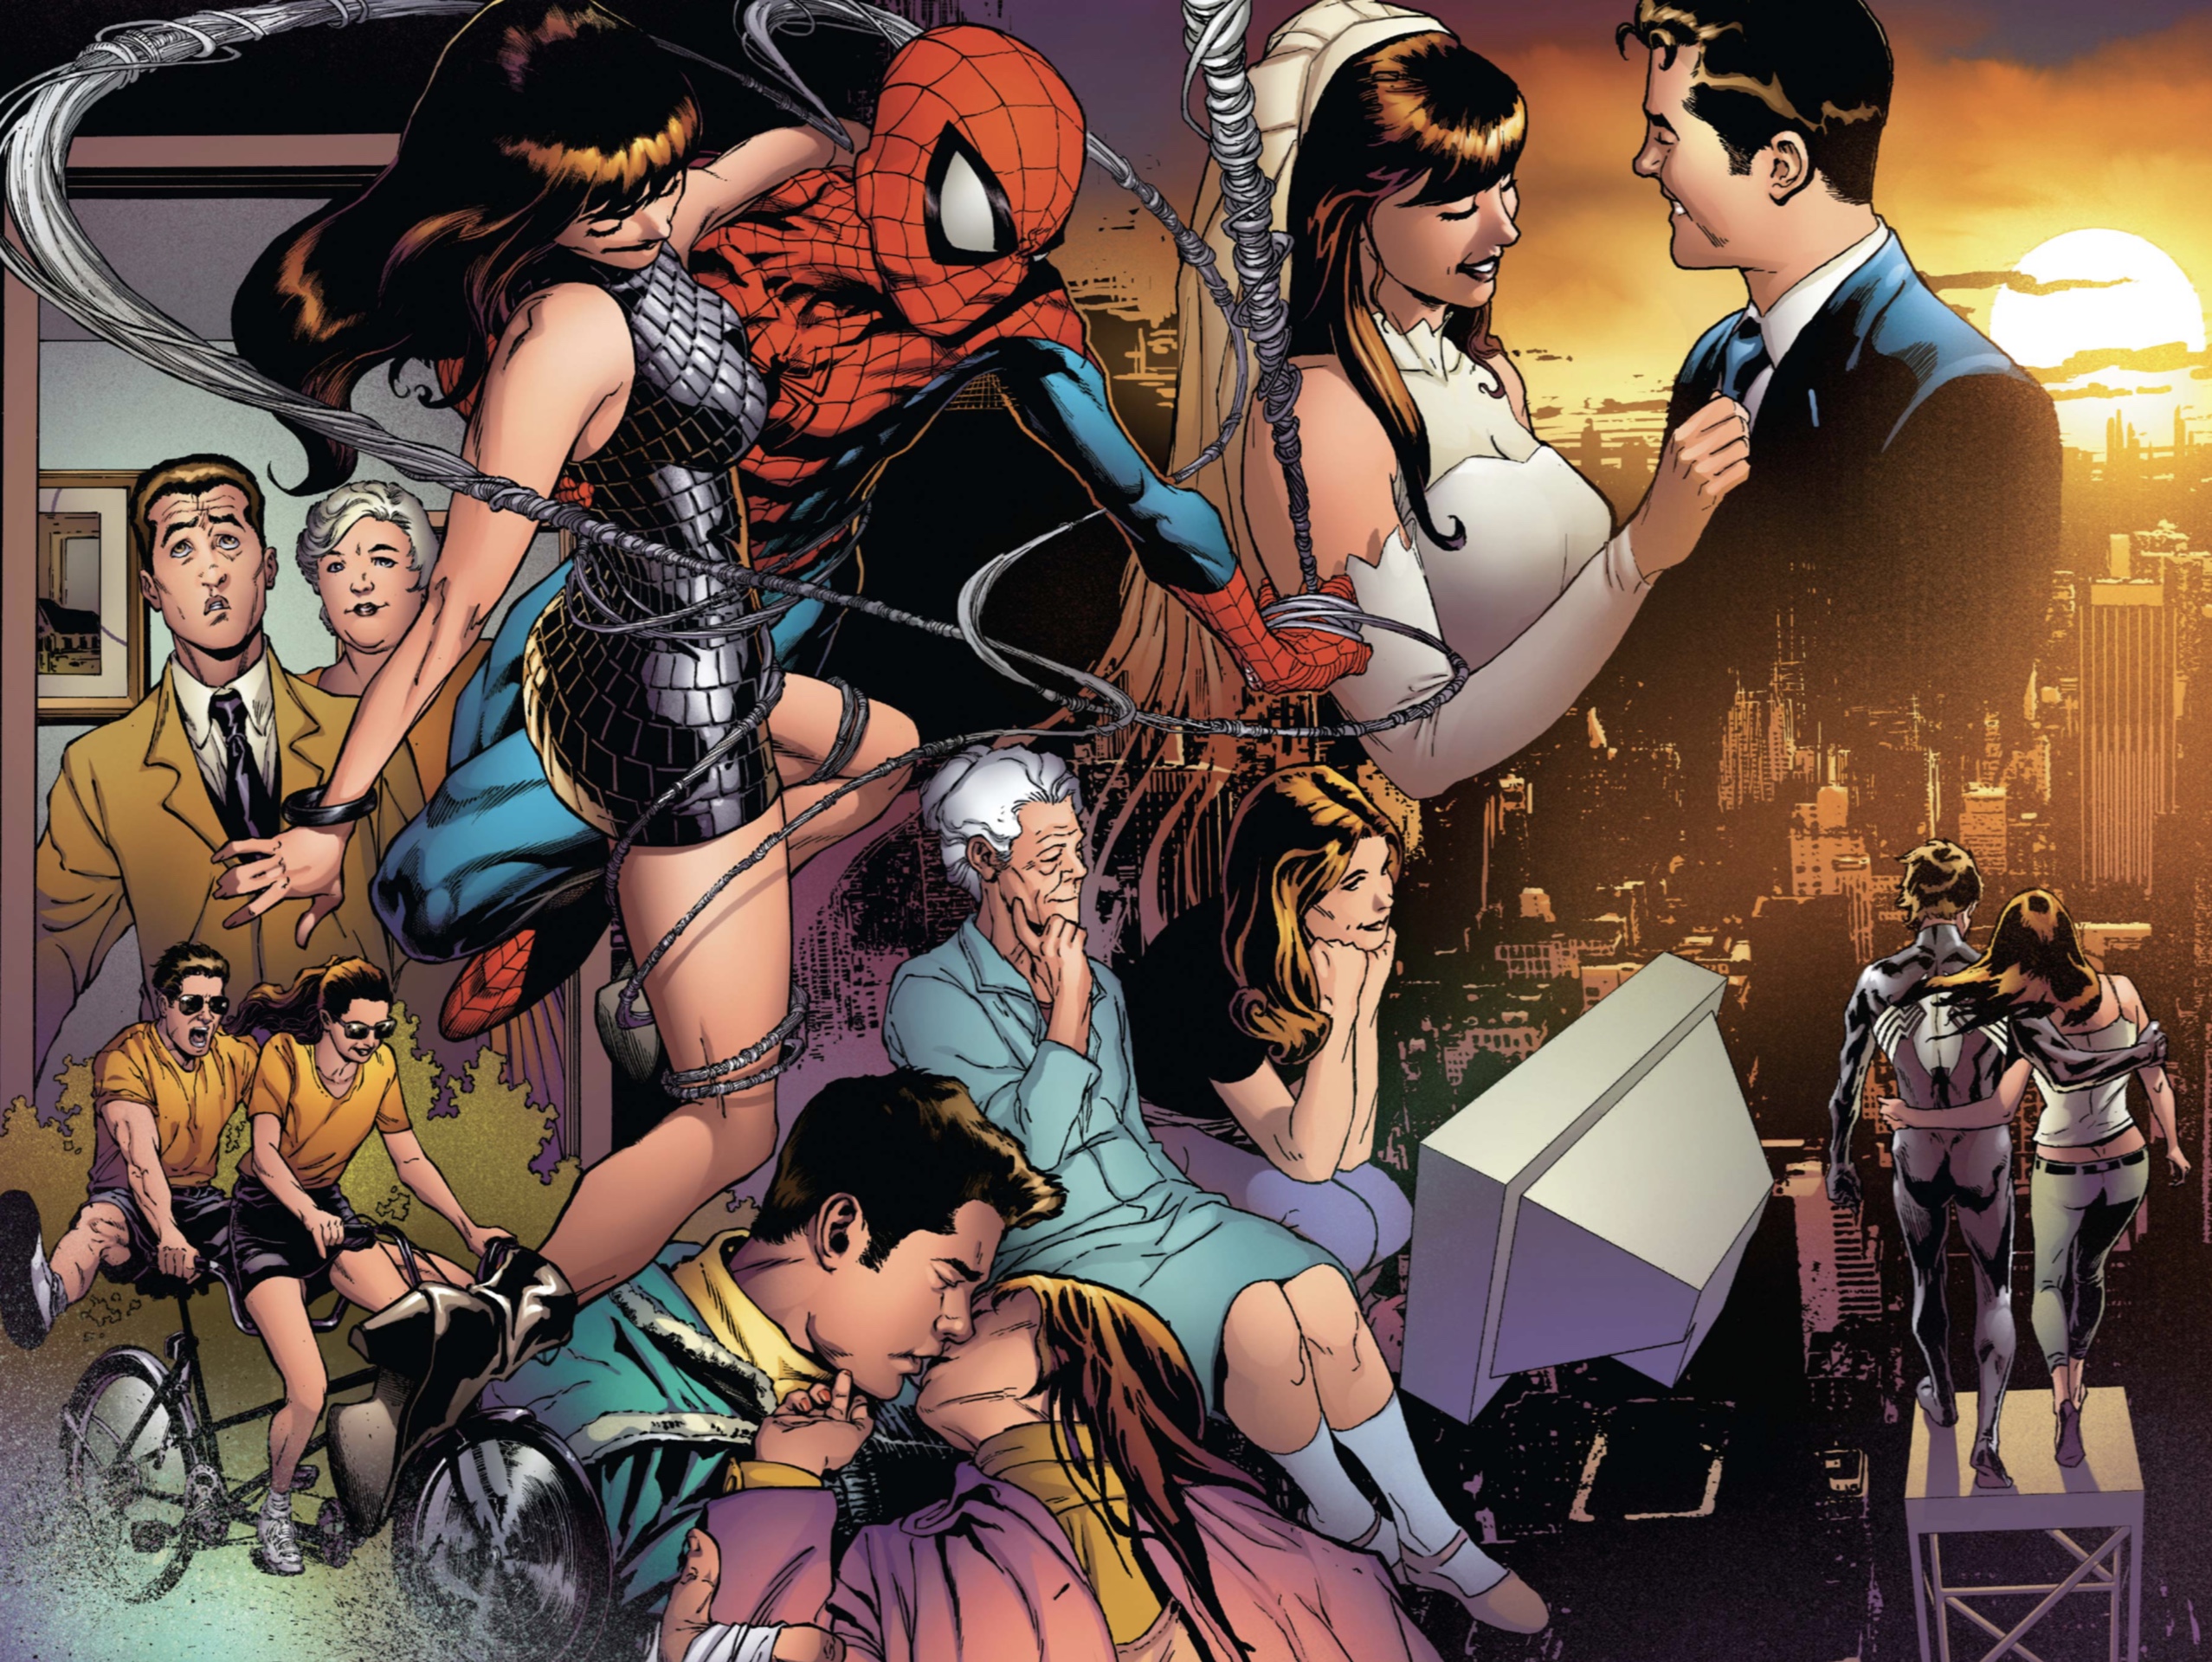 Peter Parker and Mary Jane Watson in comics